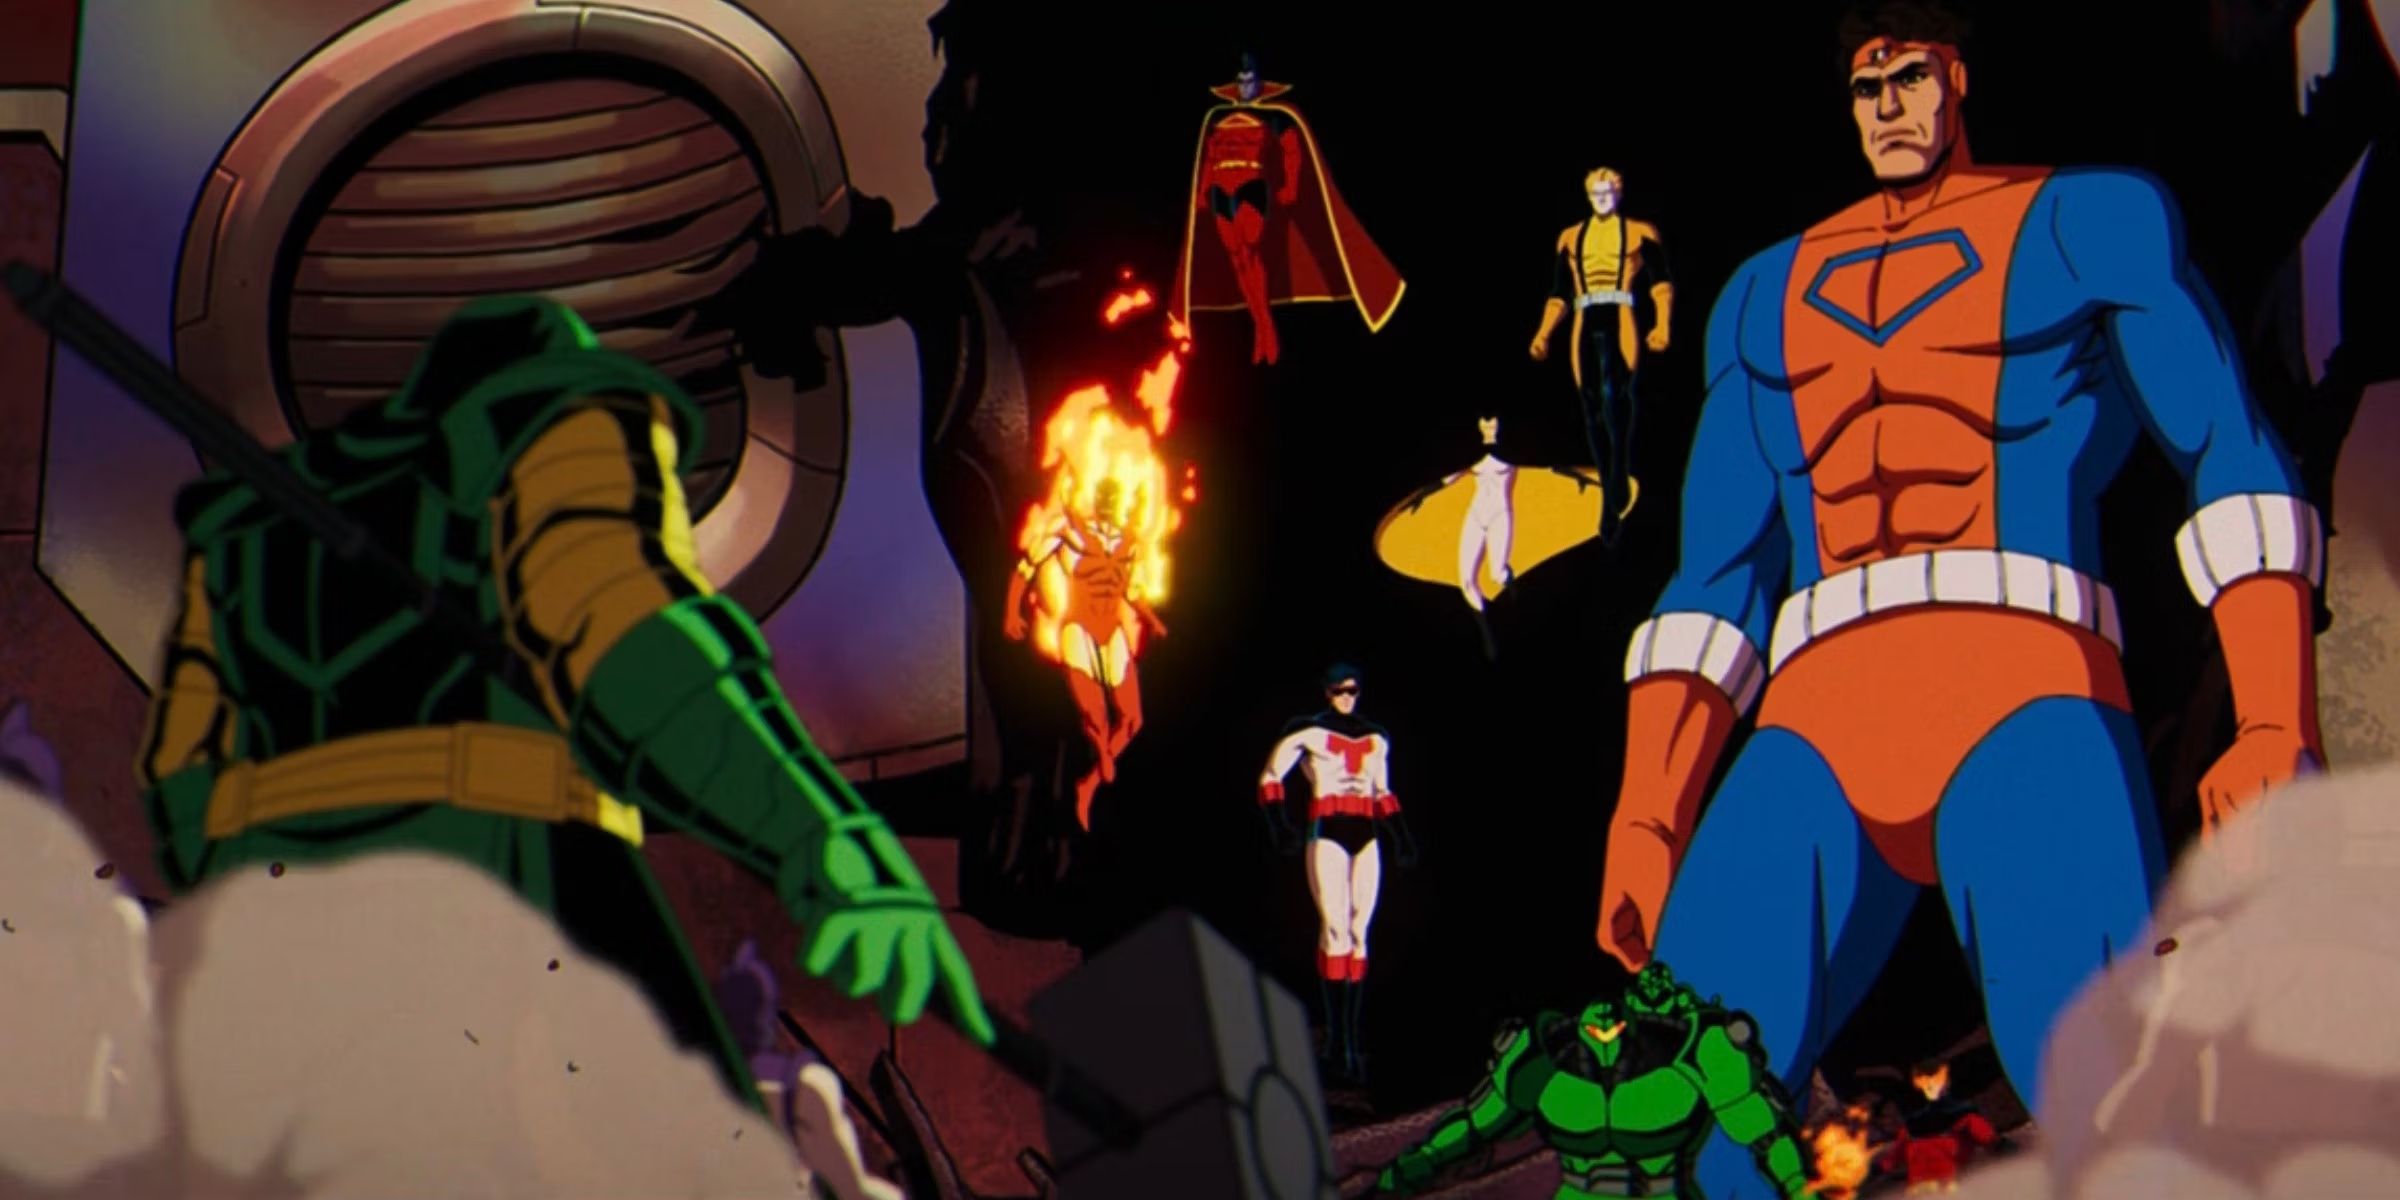 X-Men '97 depicts the Shi'ar Imperial guard fighting against the Kree warrior Ronan the Accuser